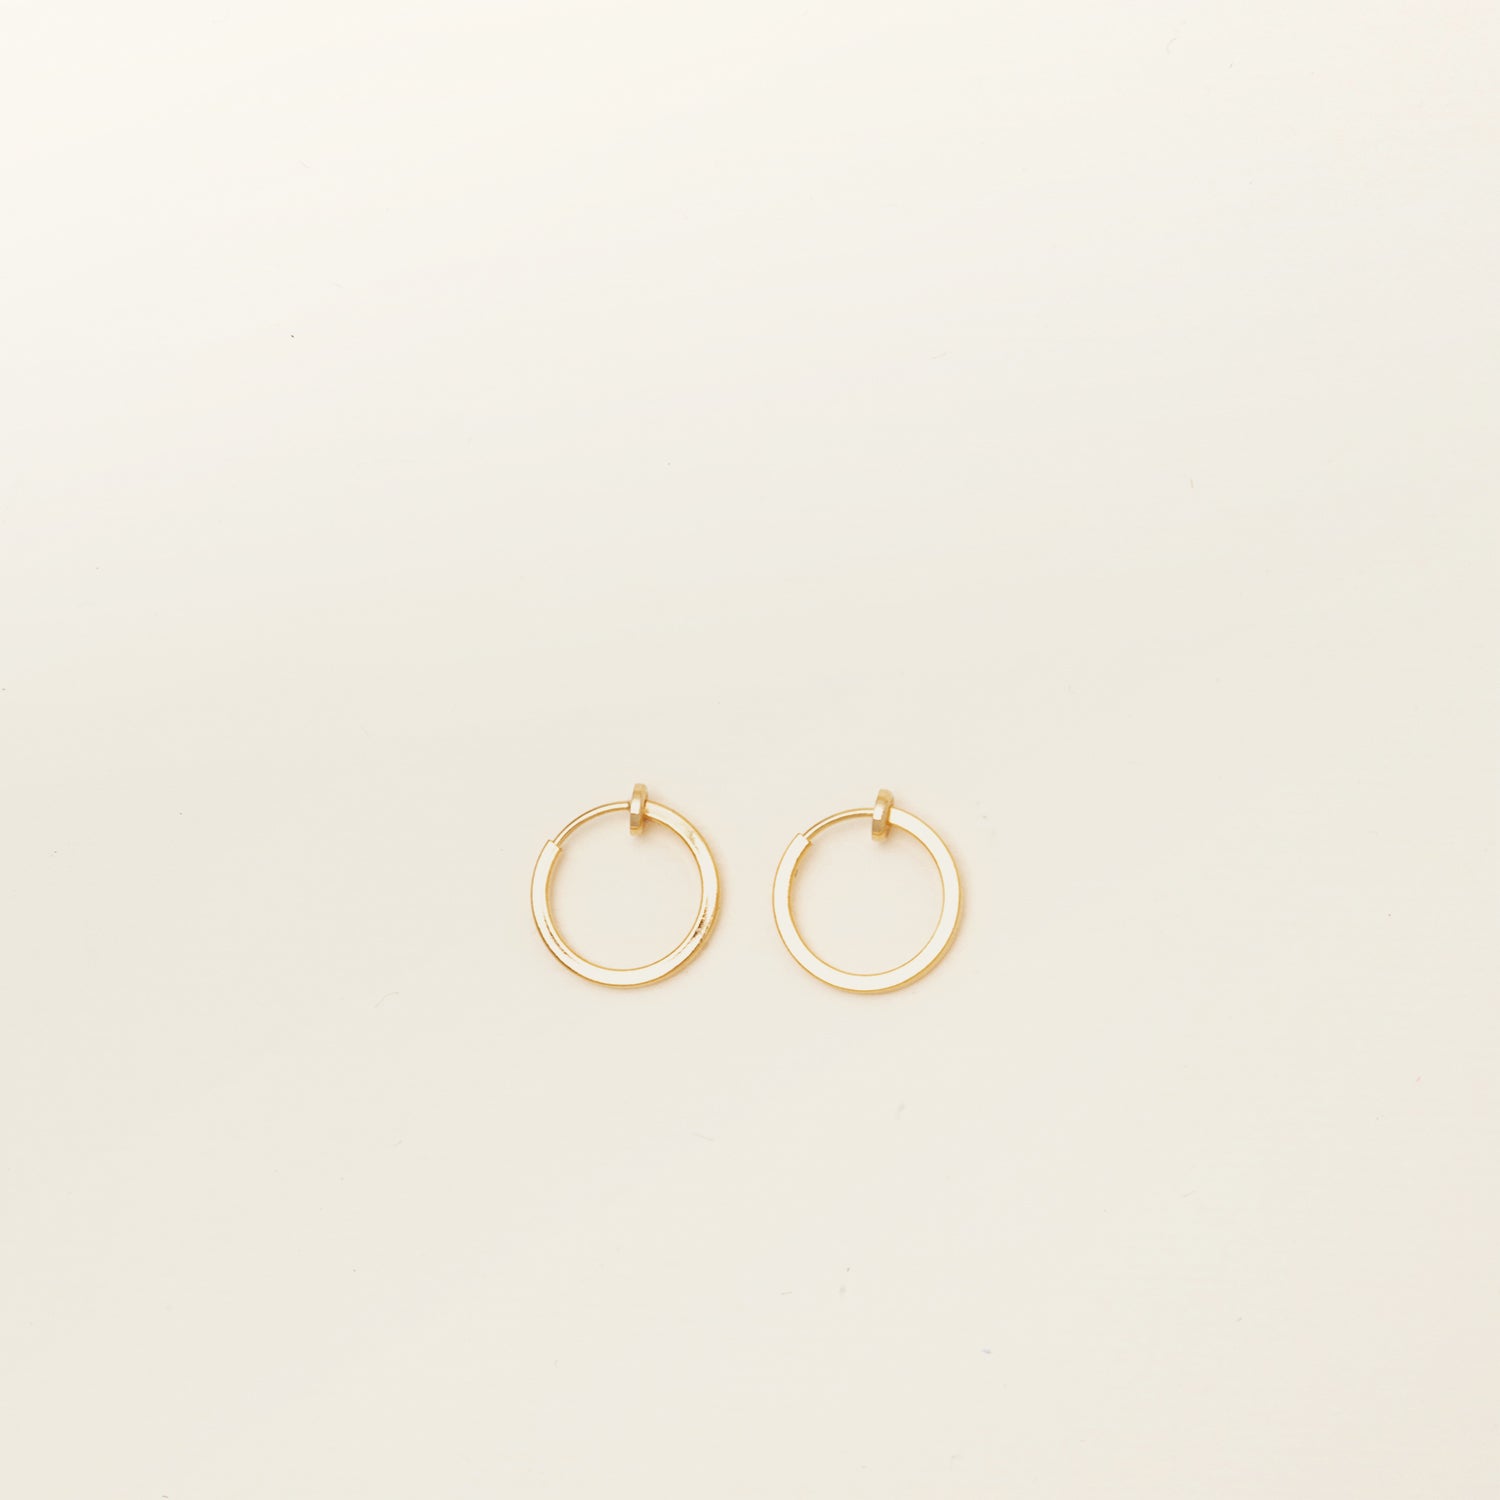 Image of the Mini Hoop Clip-On Earrings feature a sliding spring closure and are best suited for those with smaller or thinner ear lobes. On average, each pair can be comfortably worn for up to 4 hours, and provide a very secure hold that automatically adjusts to the ear thickness for a perfect fit. Crafted with stainless steel, each pair is sold individually.